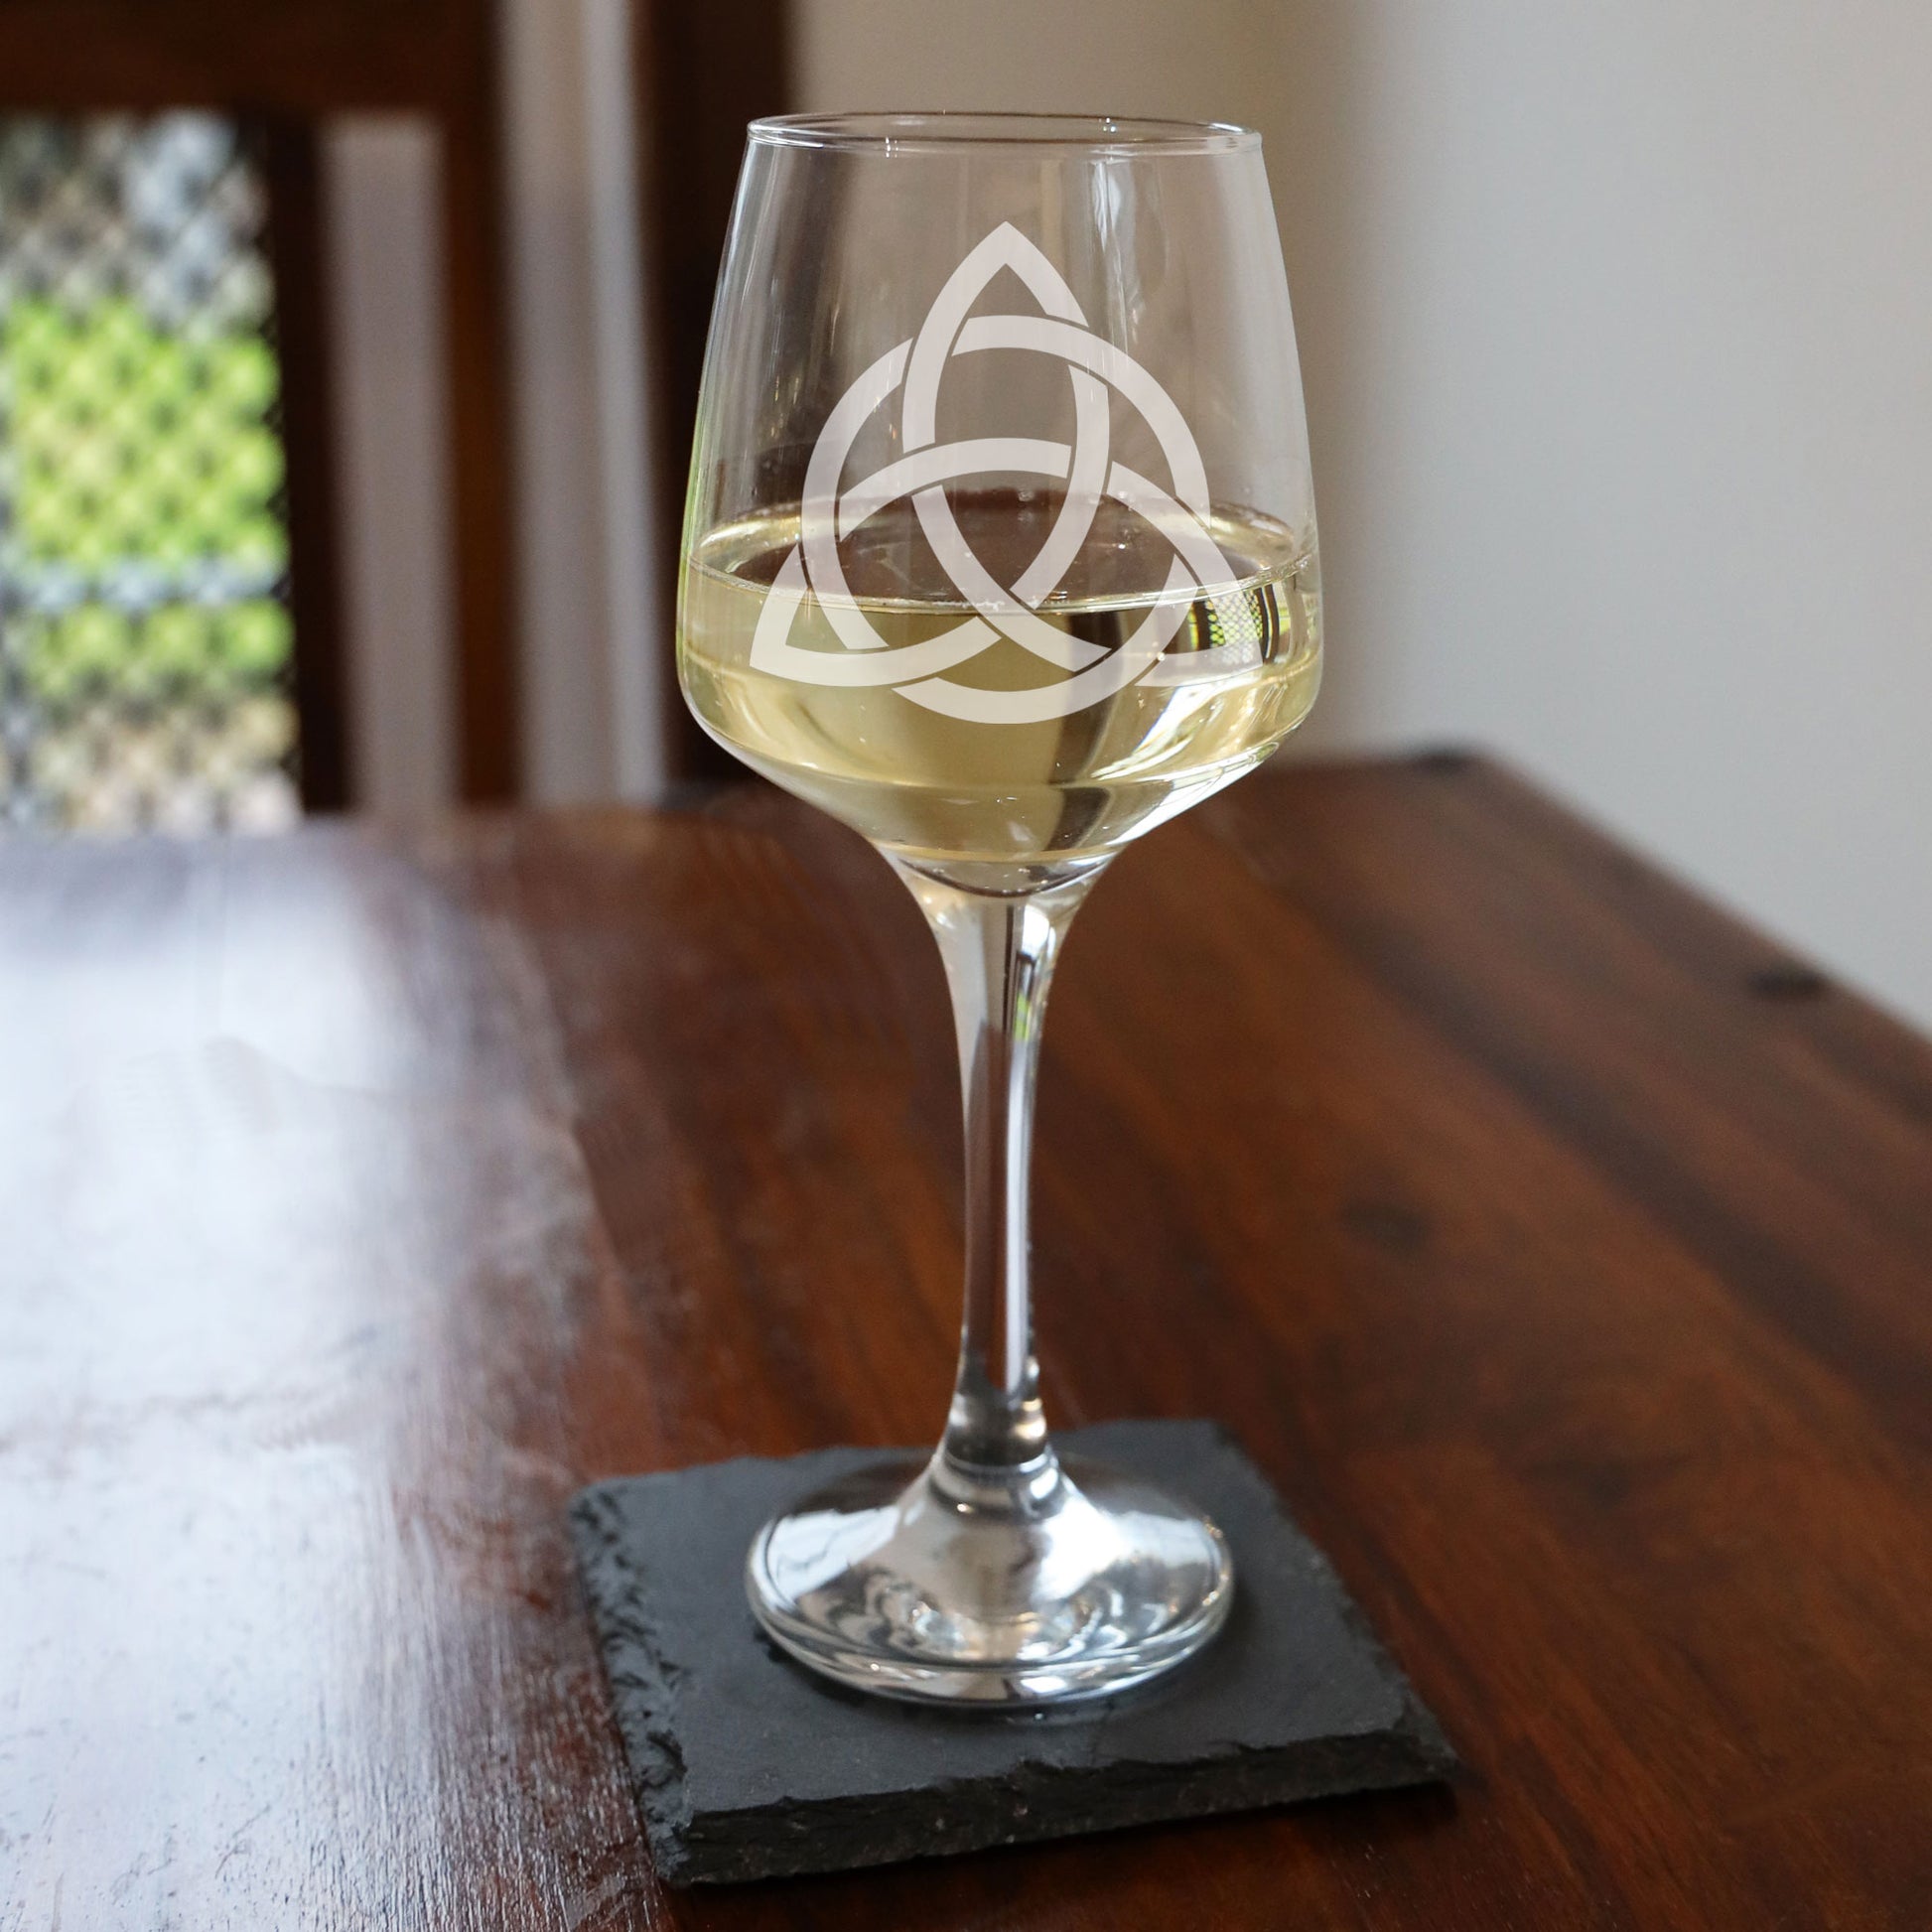 Celtic Knot Irish Engraved Wine Glass and/or Coaster Set  - Always Looking Good -   